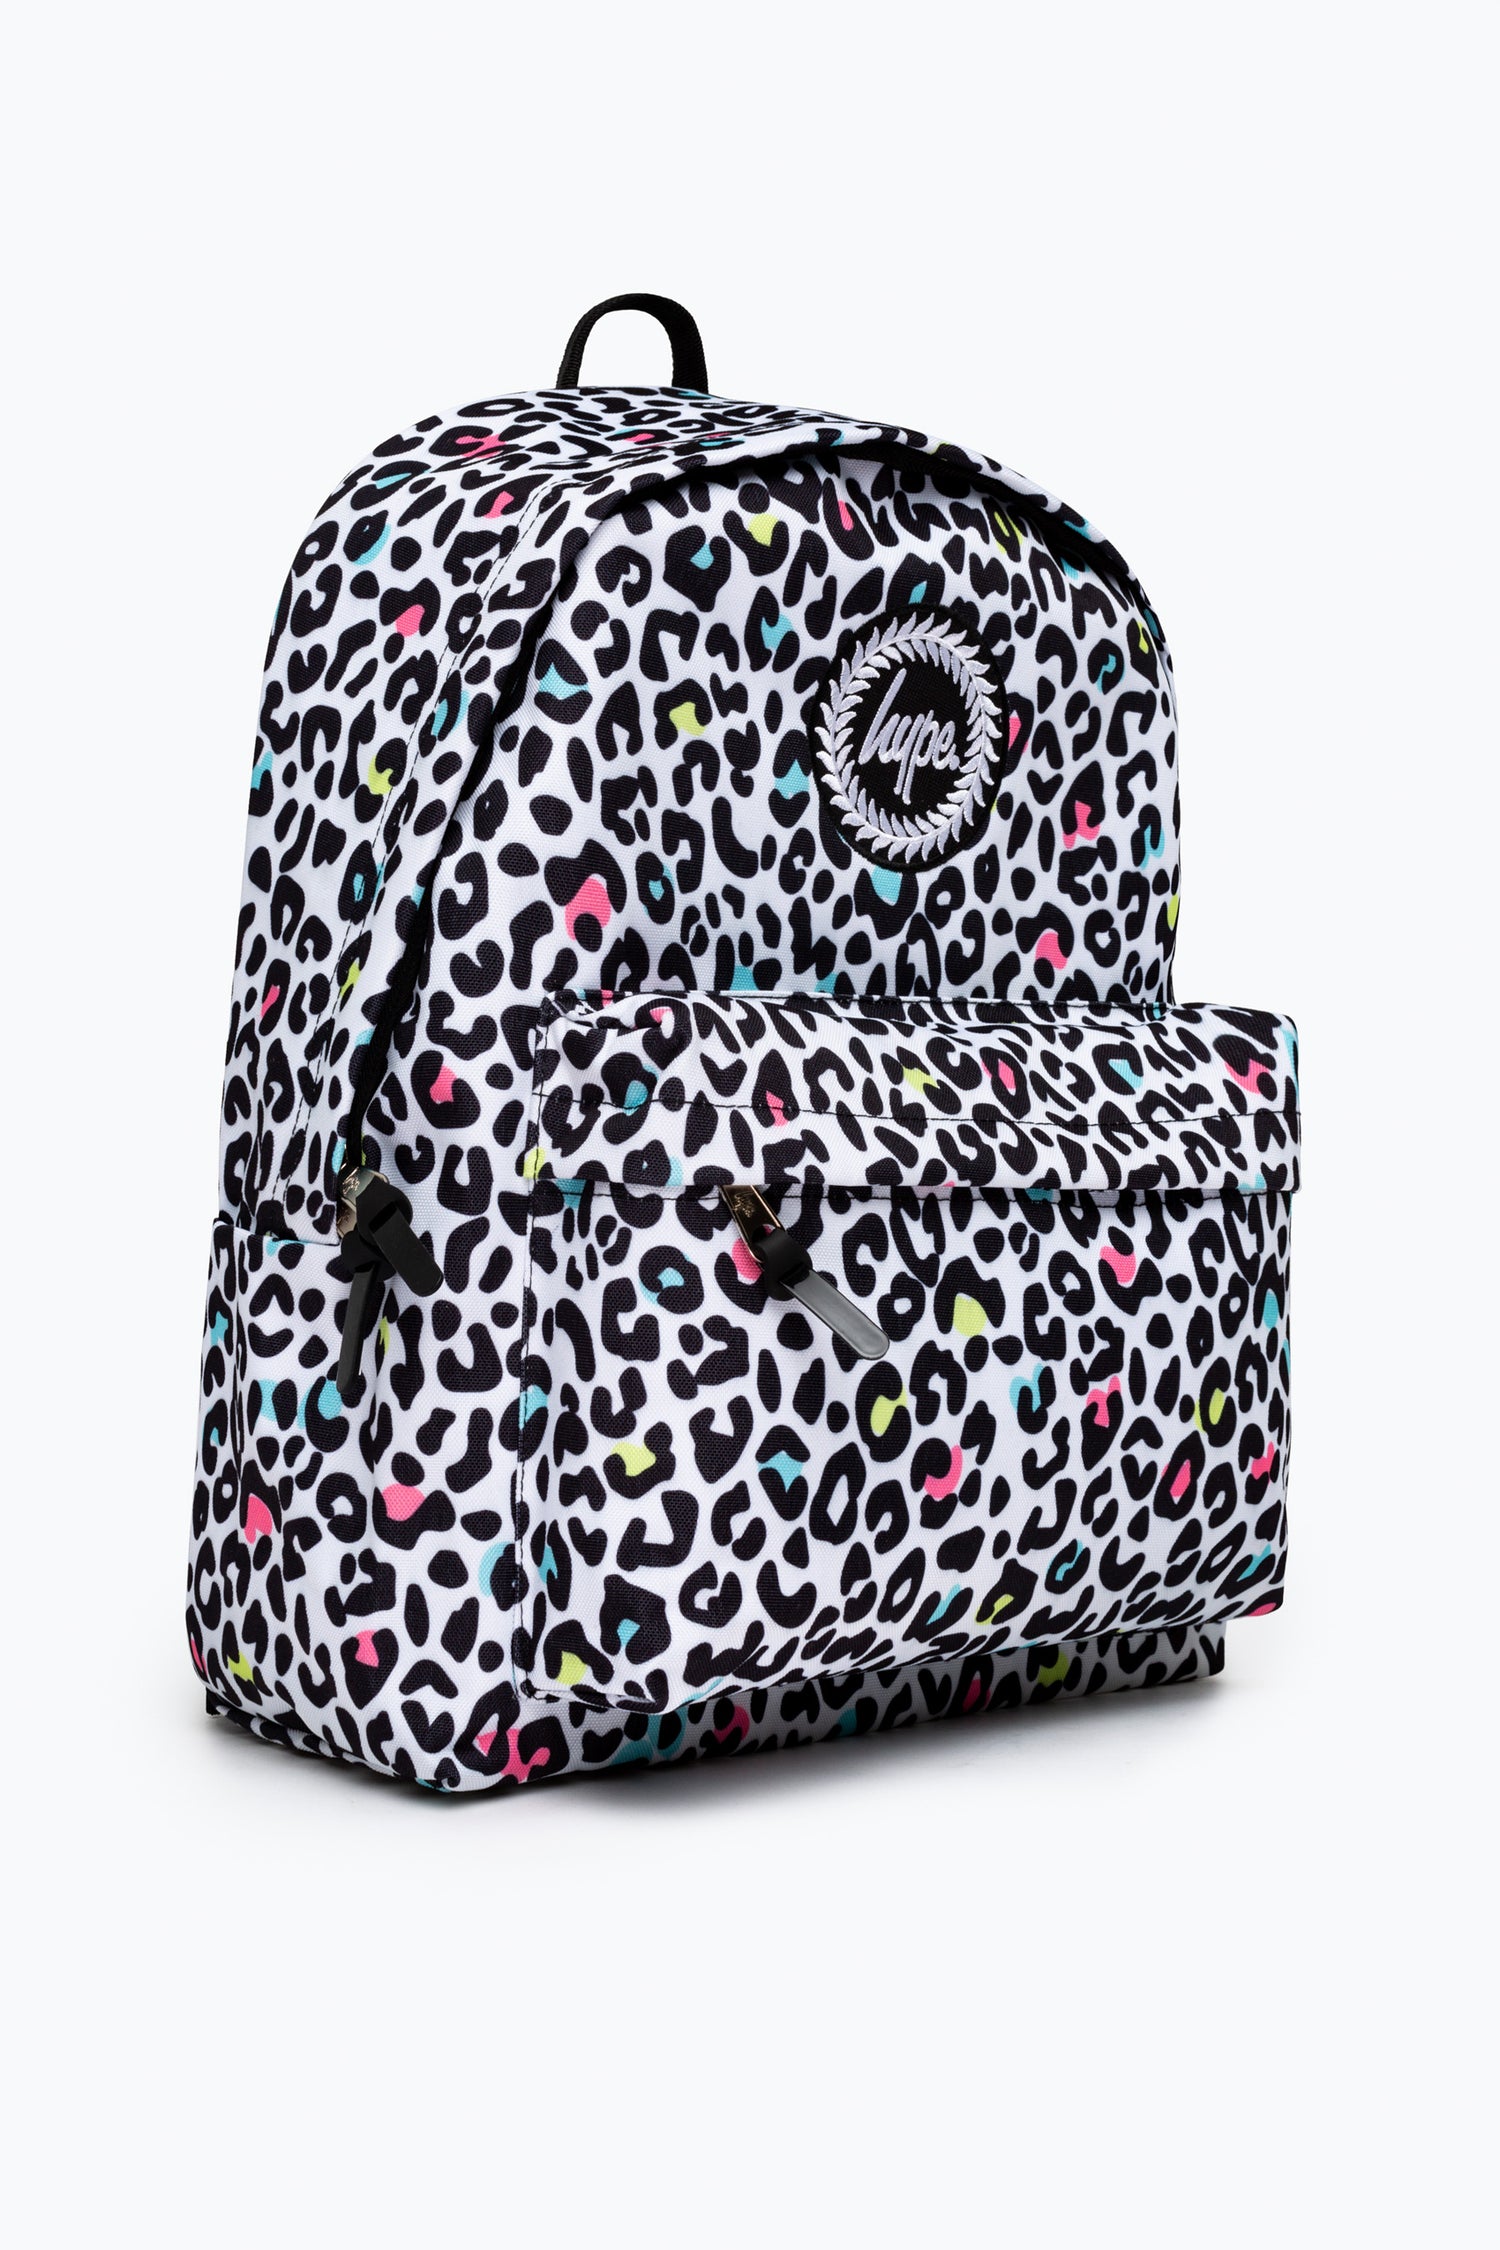 HYPE WHITE LEOPARD BACKPACK | Hype.